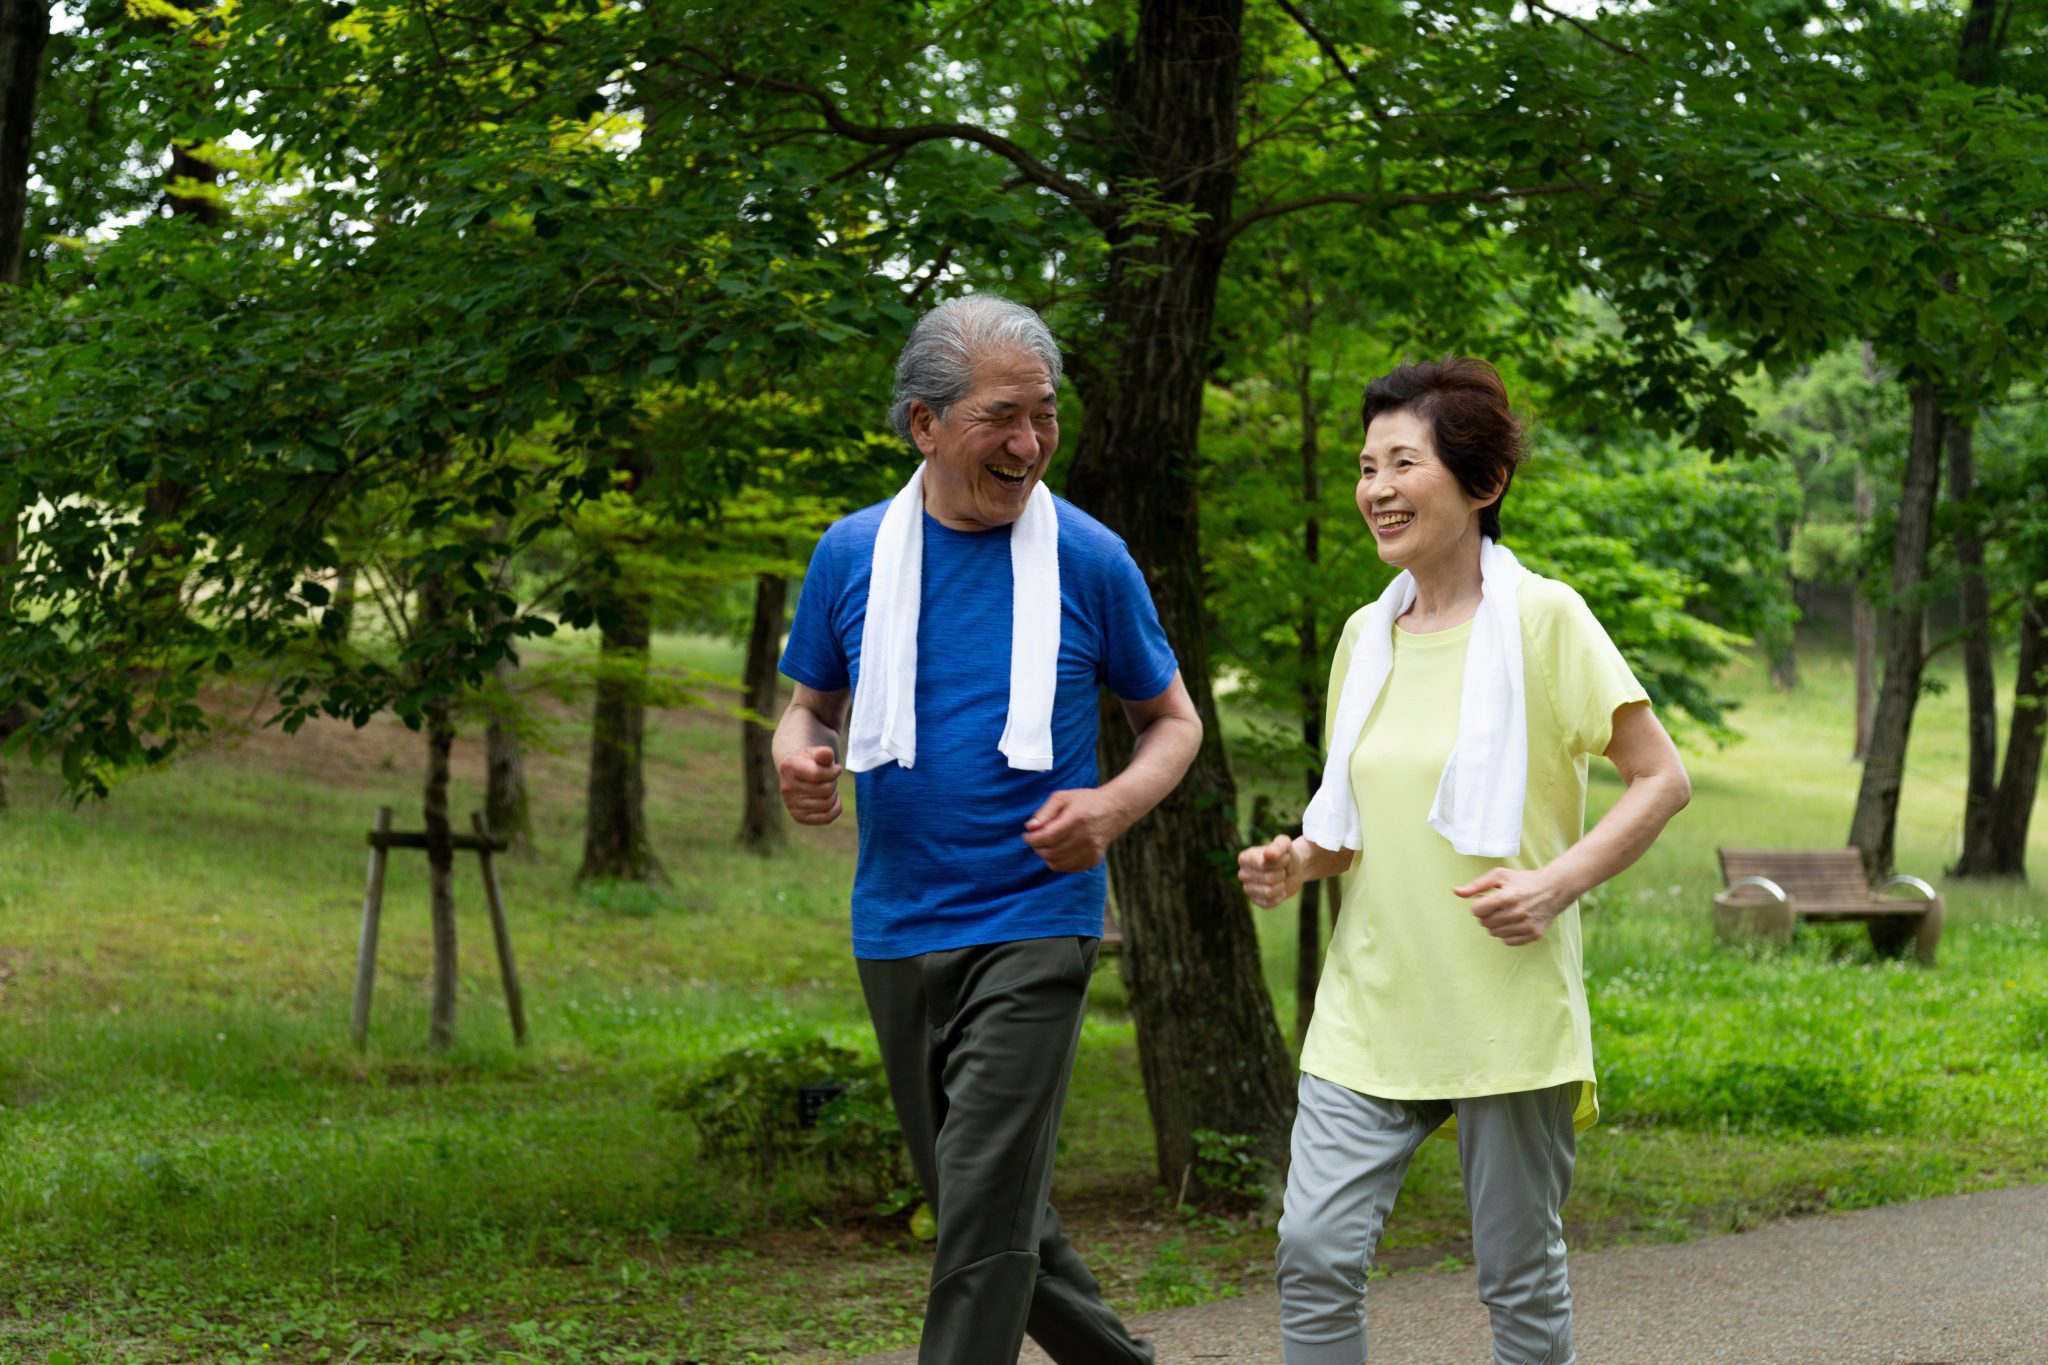 Get Active! Start walking during American Heart Health Month